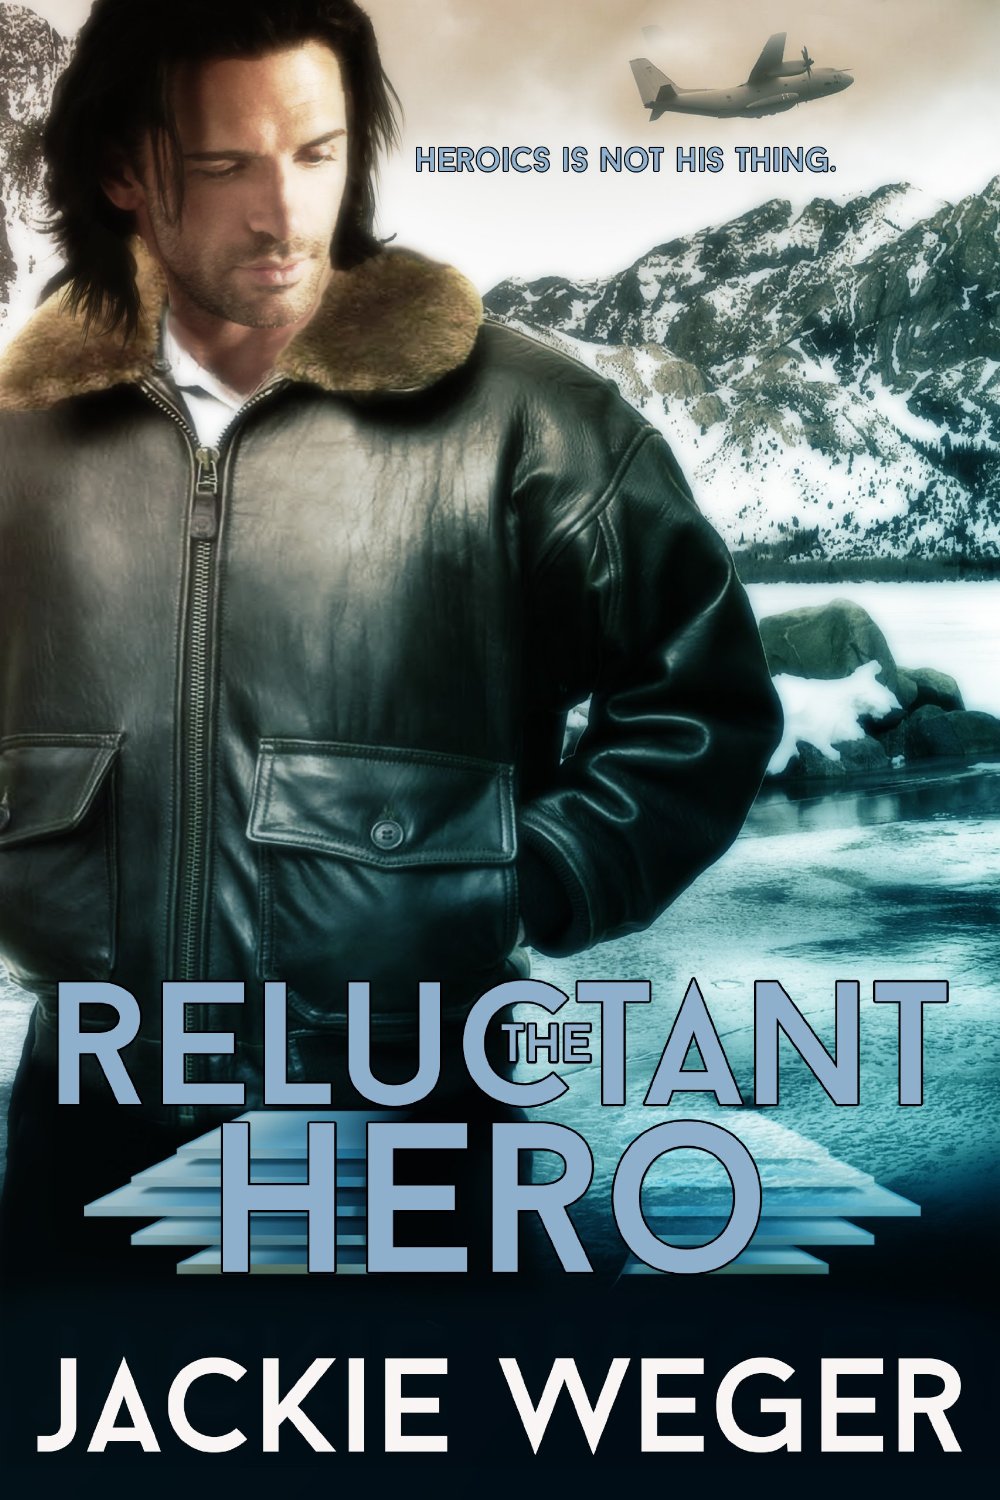 The Reluctant Hero by Jackie Weger